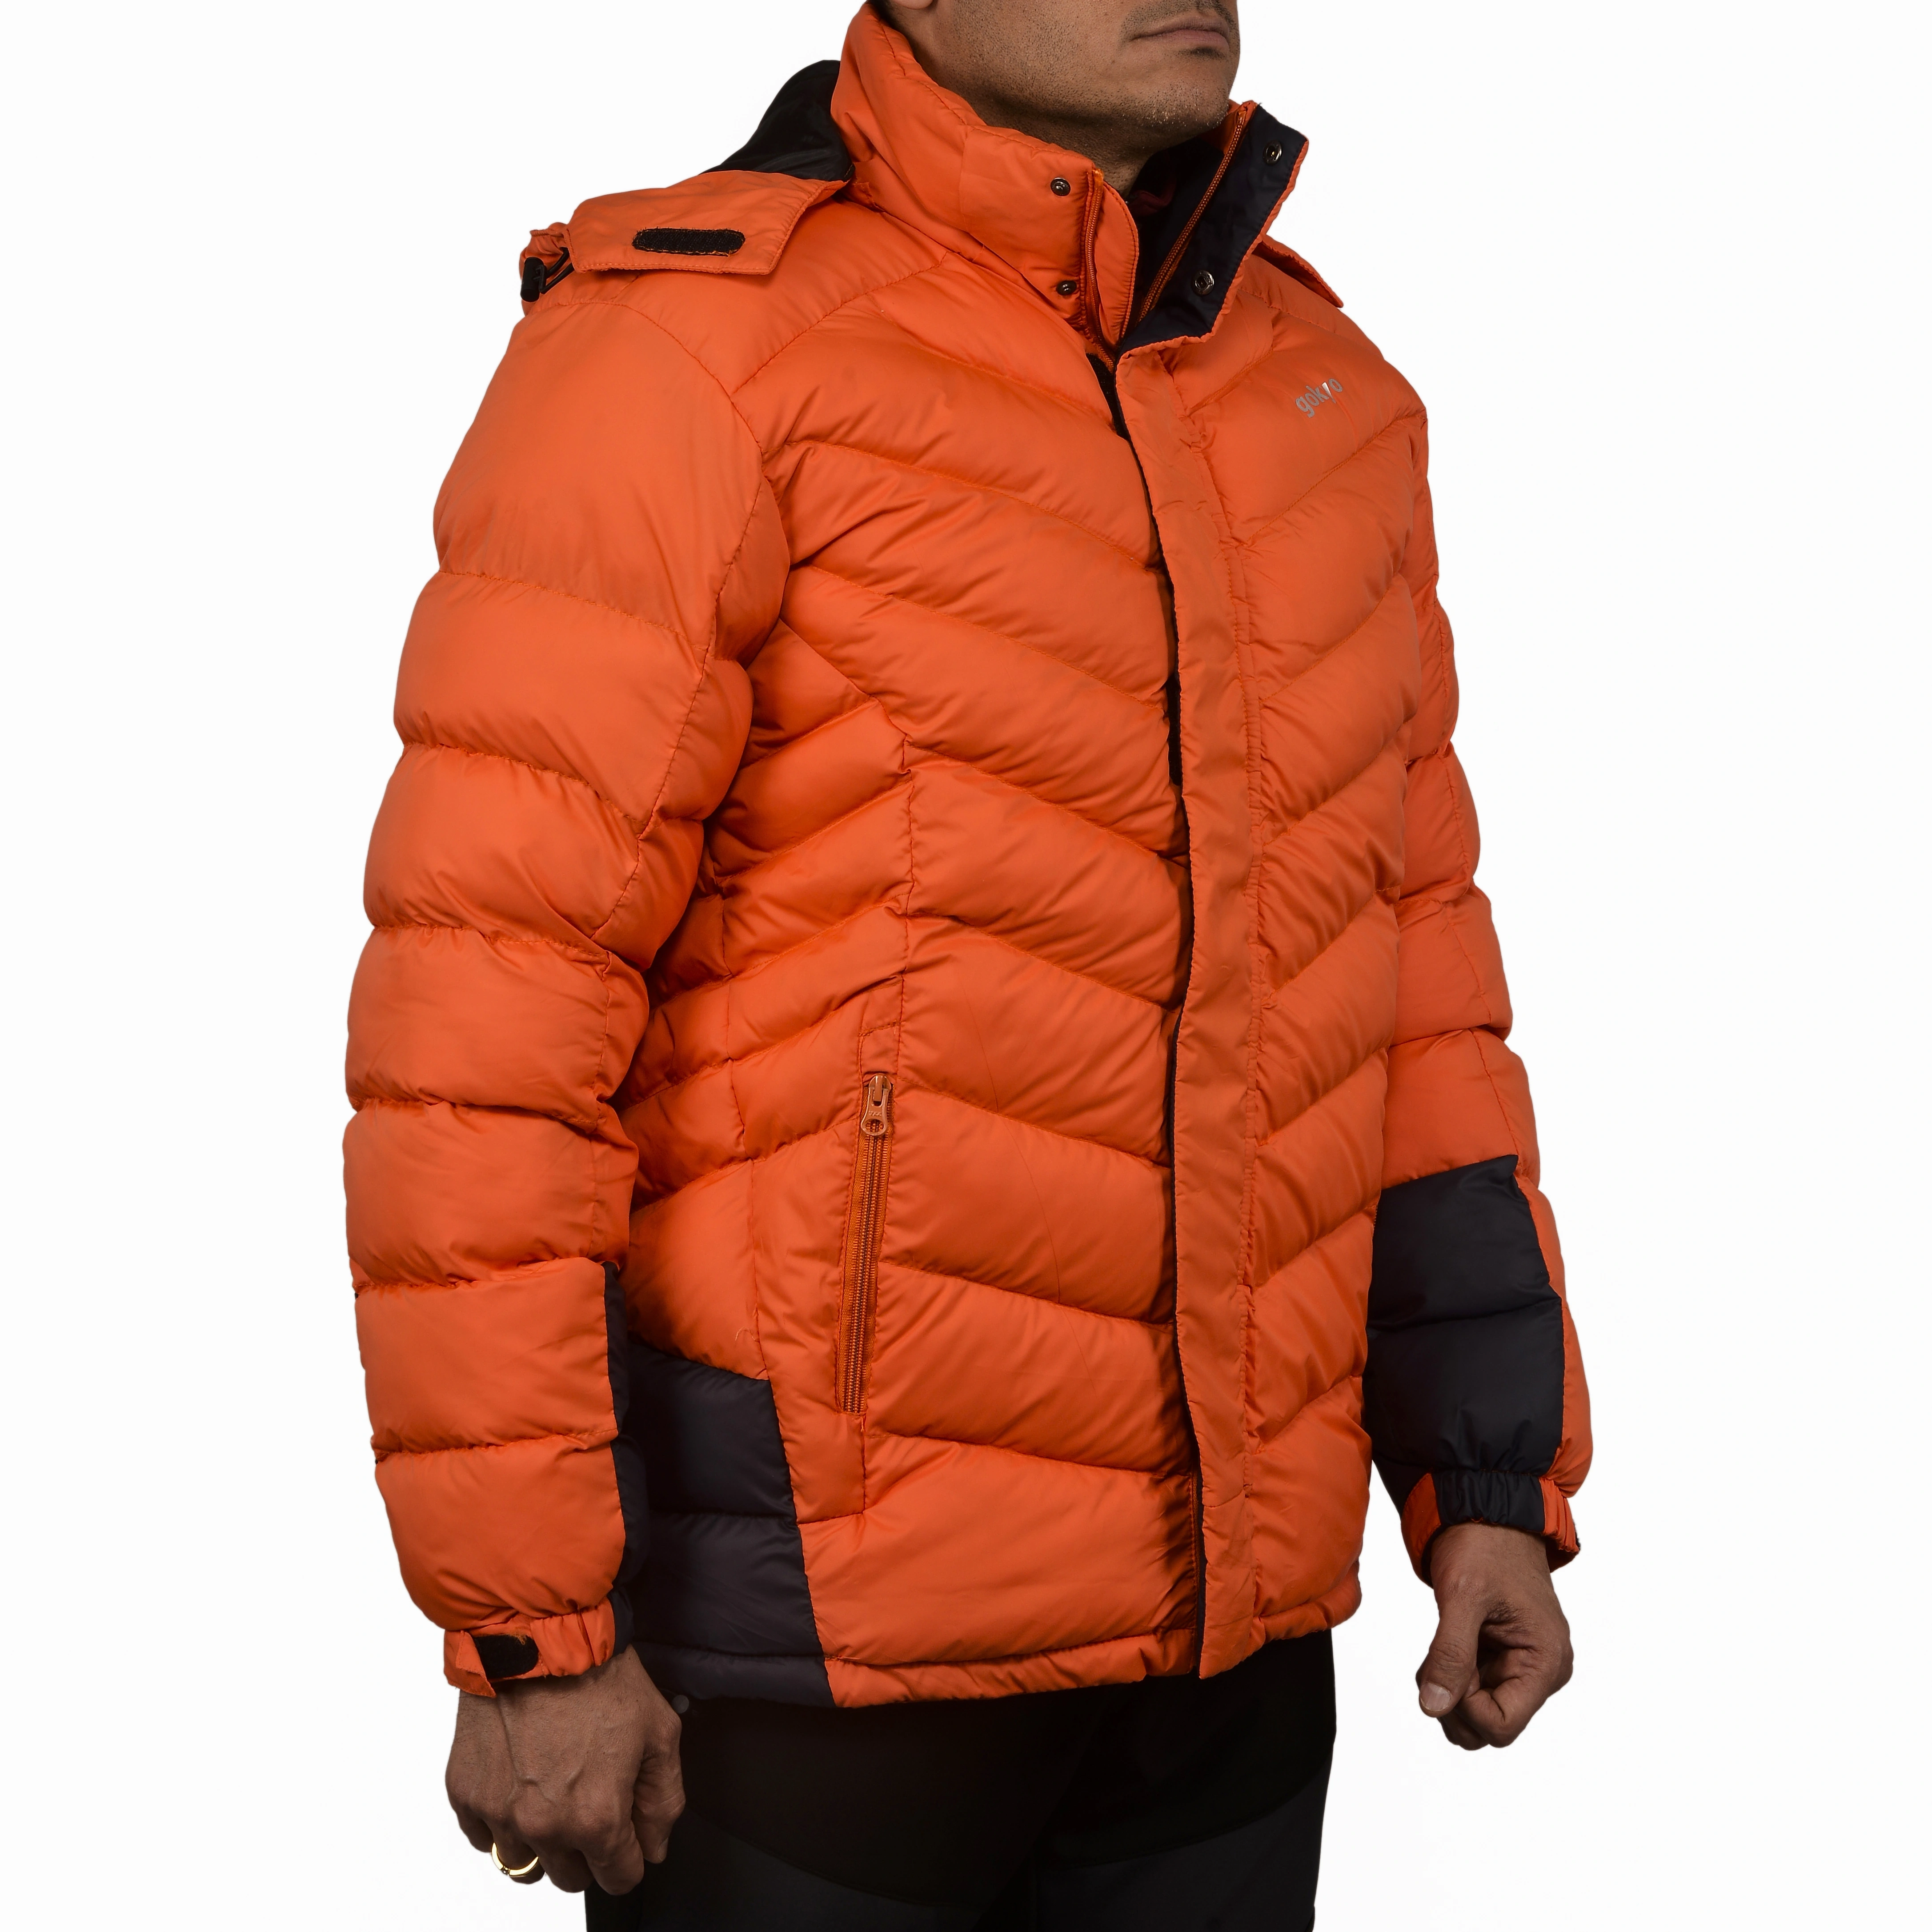 K2 Survivor Down Jacket for Men: Stylized Functionality for Extreme Cold Weather Expeditions (Up to -20°C)-XXL-Orange-1